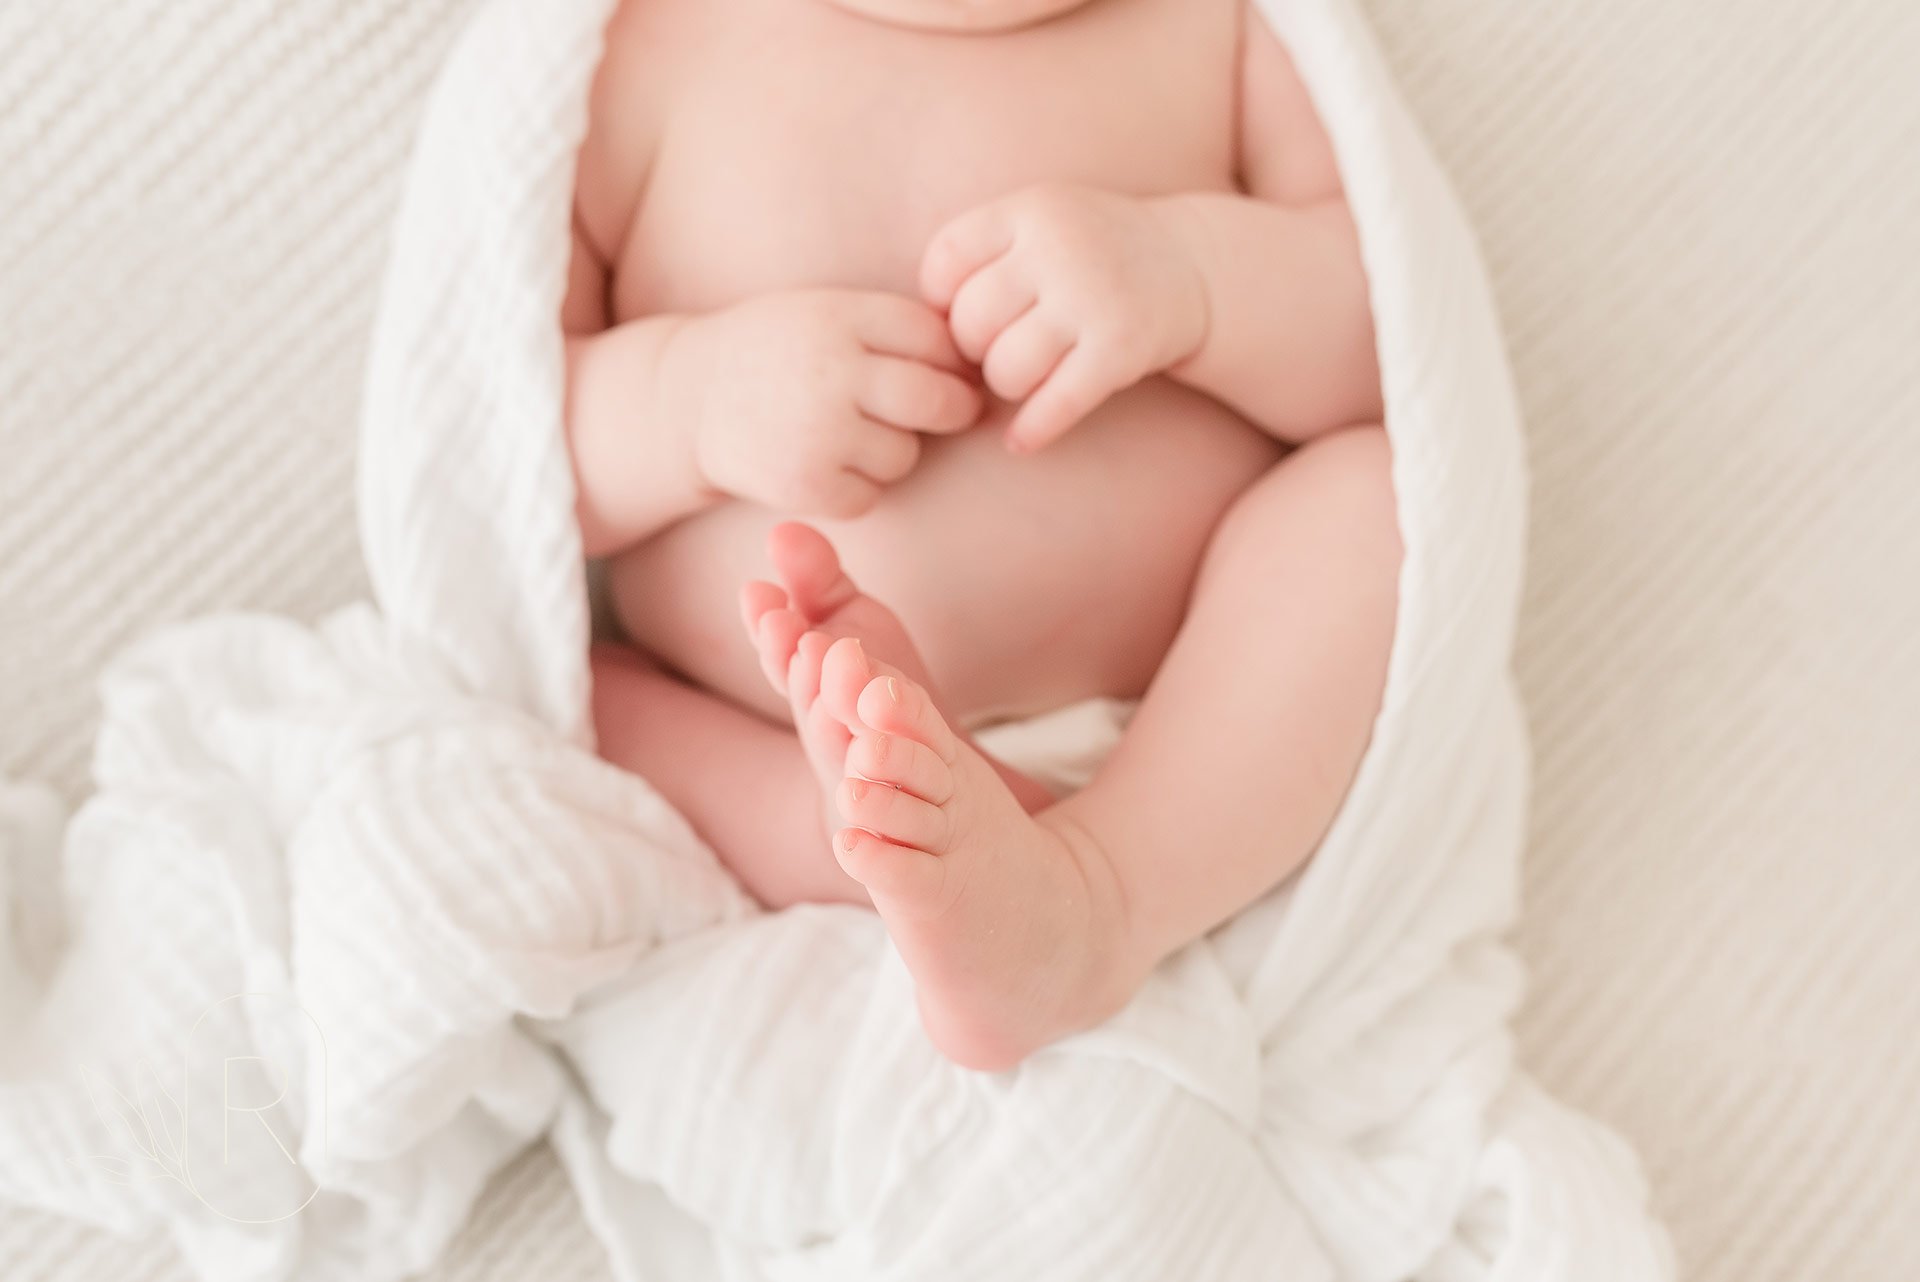 newborn-fingers-and-toes-snuggled-moments-family-photography-Reflections-niagara-ontario.jpeg